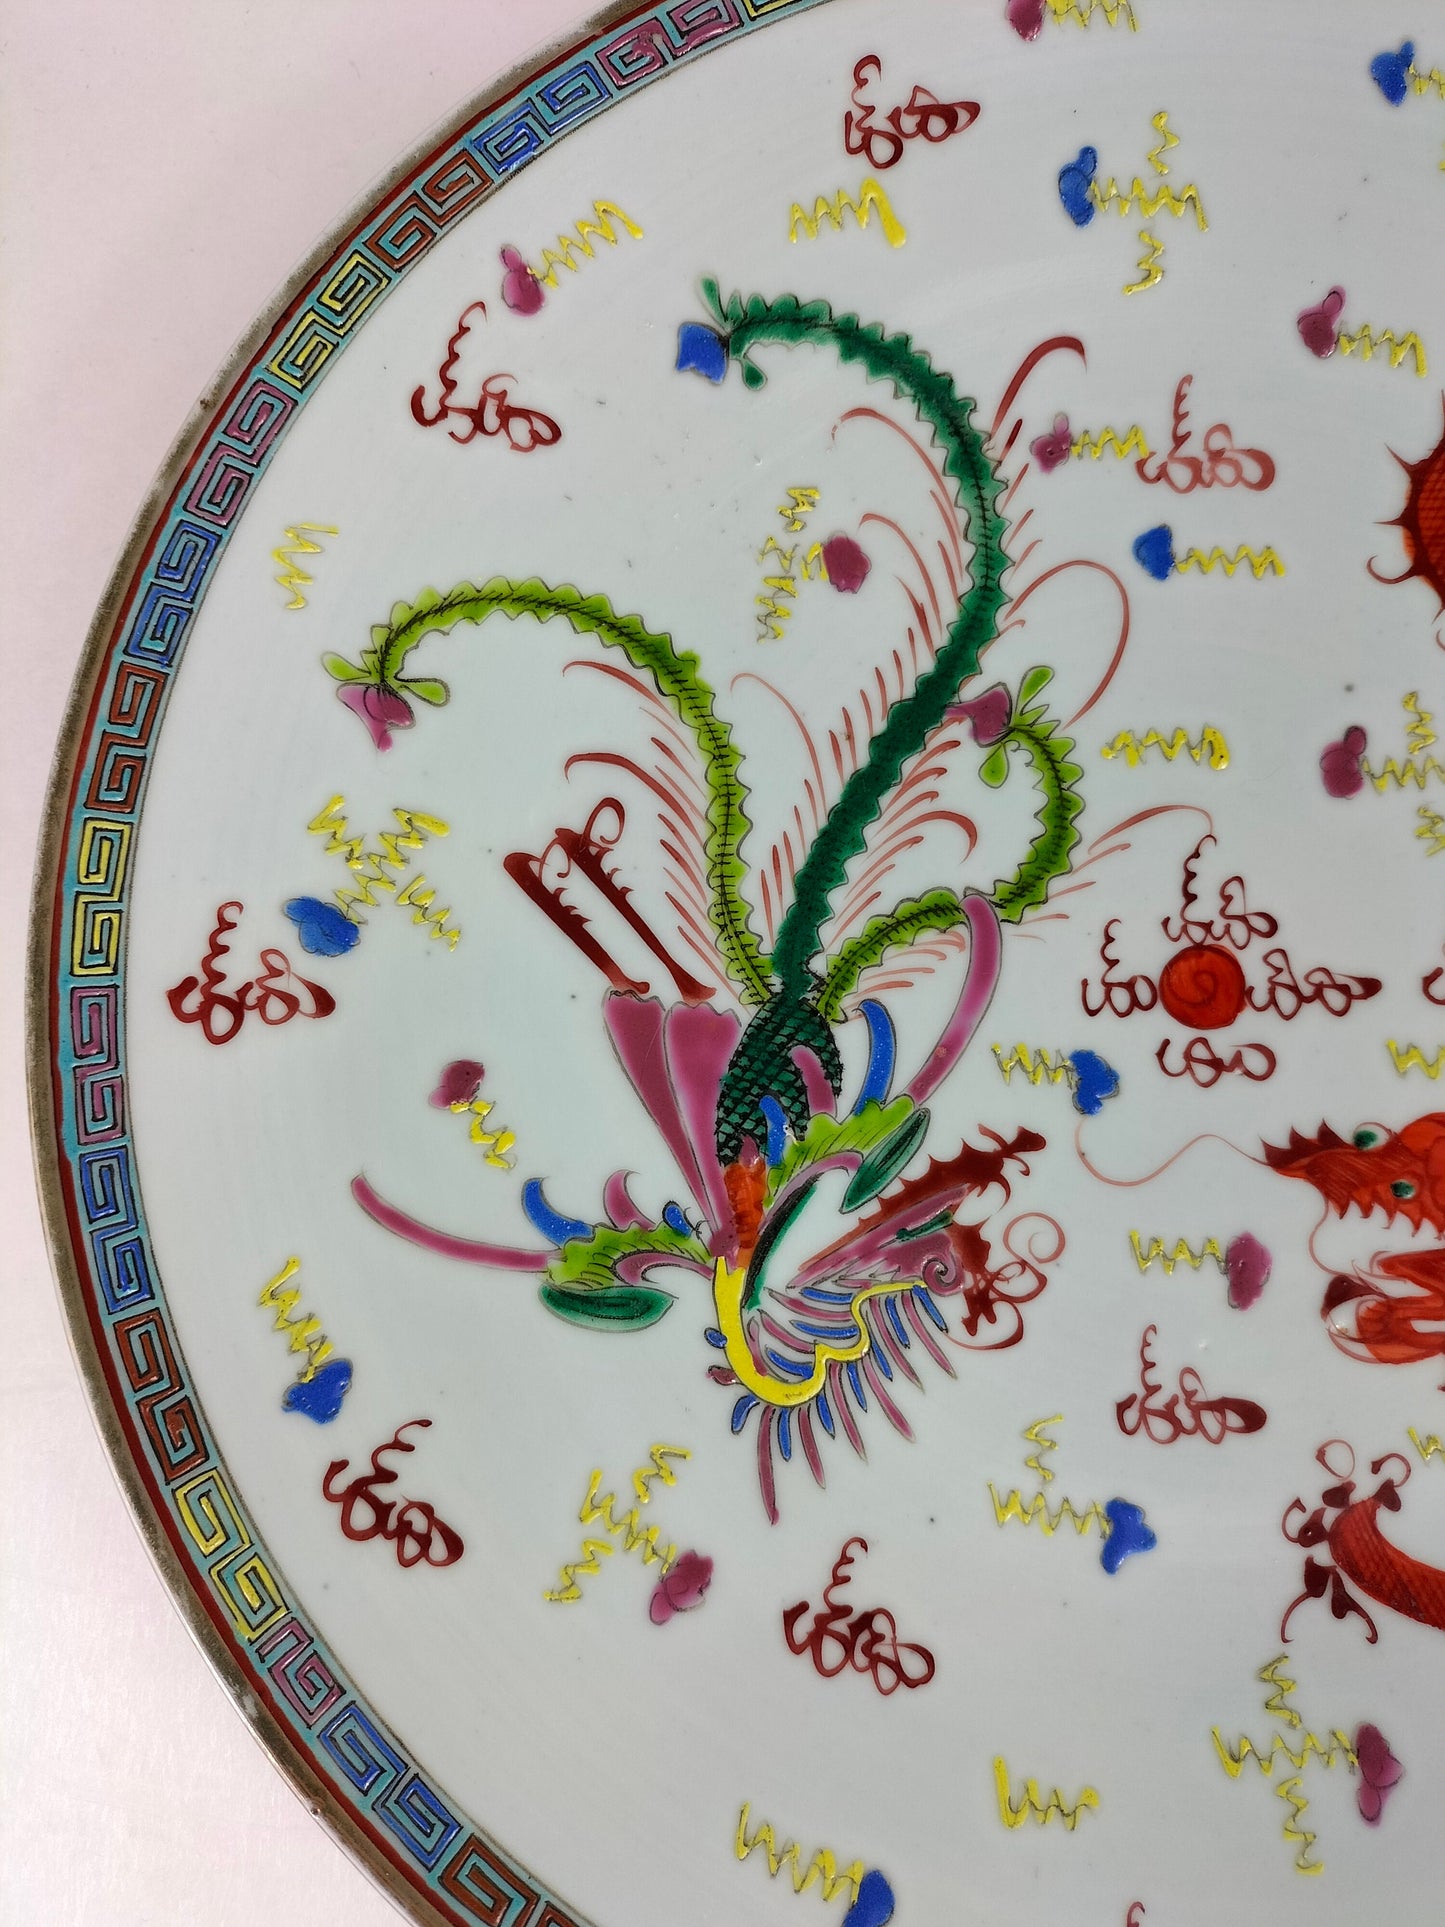 Large antique Chinese plate decorated with a dragon and a phoenix // Republic Period (1912-1949)